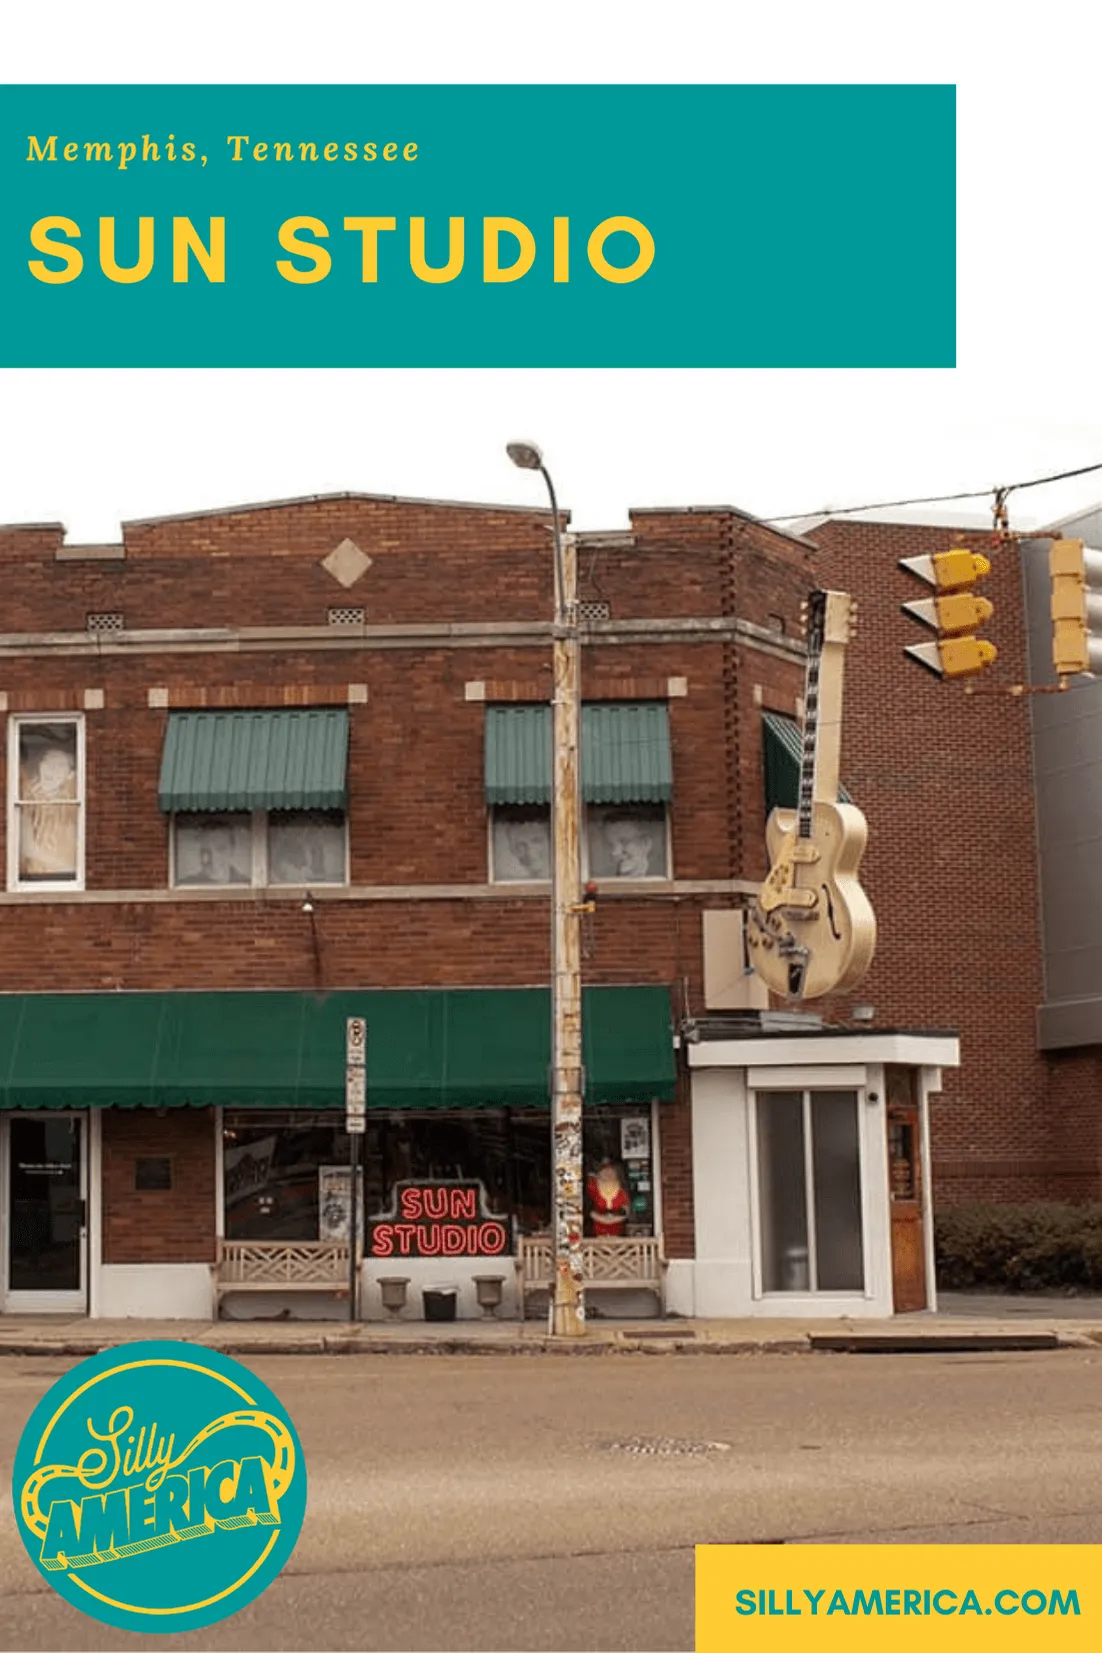 Tour Sun Studio in Memphis, Tennessee, known as the "Birthplace of Rock ‘n' Roll" and "the most famous recording studio in the world." Step in the shoes of Elvis Presley and other rock legends and this famous Memphis tourist attraction.  #Elvis #Elvis #TennesseeRoadsideAttractions #TennesseeRoadsideAttraction #RoadsideAttractions #RoadsideAttraction #RoadTrip #TennesseeRoadTrip #TennesseeBucketList #ThingsToDoInTennessee #MemphisRoadsideAttractions #MemphisRoadsideAttraction  #Memphis